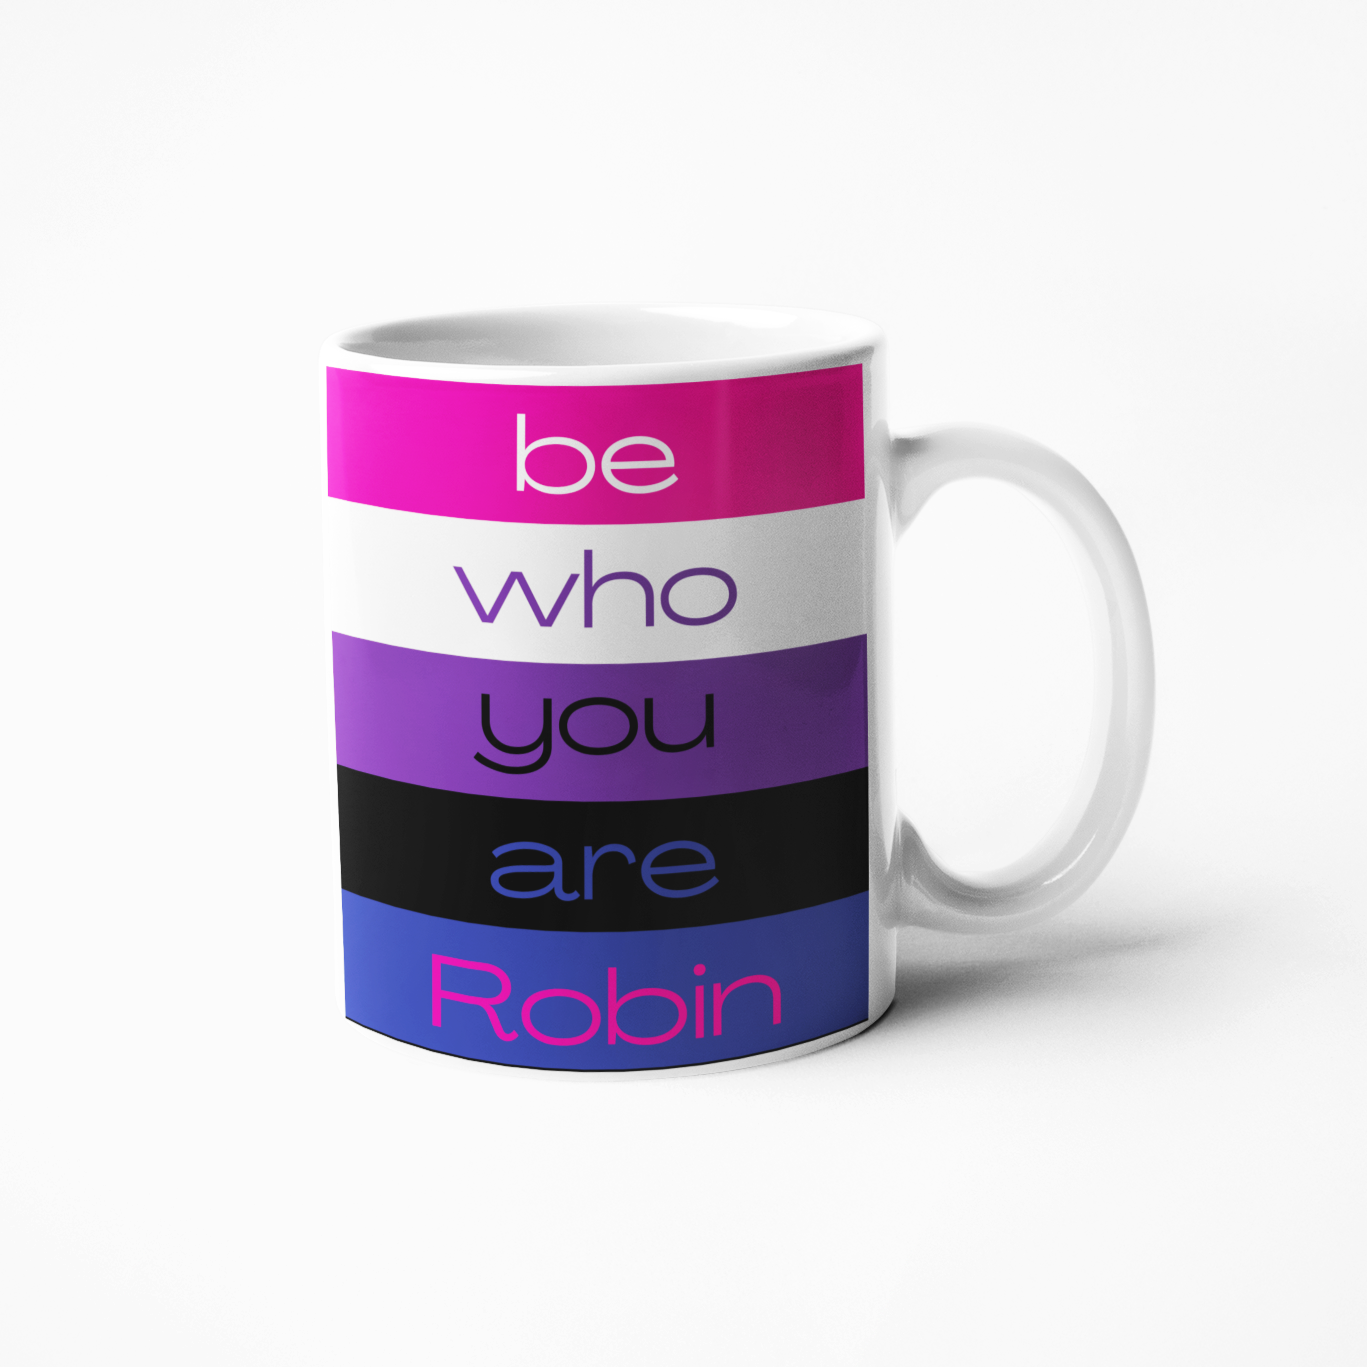 This beautiful Gender fluid LGBTQIA personalised coffee mug is a perfect gift for any gender fluid person. It is a great way of showing your support and appreciation. With a glossy finish and vibrant colour, this mug will make someone you care about feel special. Get yours now!  Available in-  11oz white mug 15oz white mug 11oz black inner mug 11oz pink inner mug 9cm mdf coaster Mugs are-   Microwave safe Dishwasher safe Printed both sides